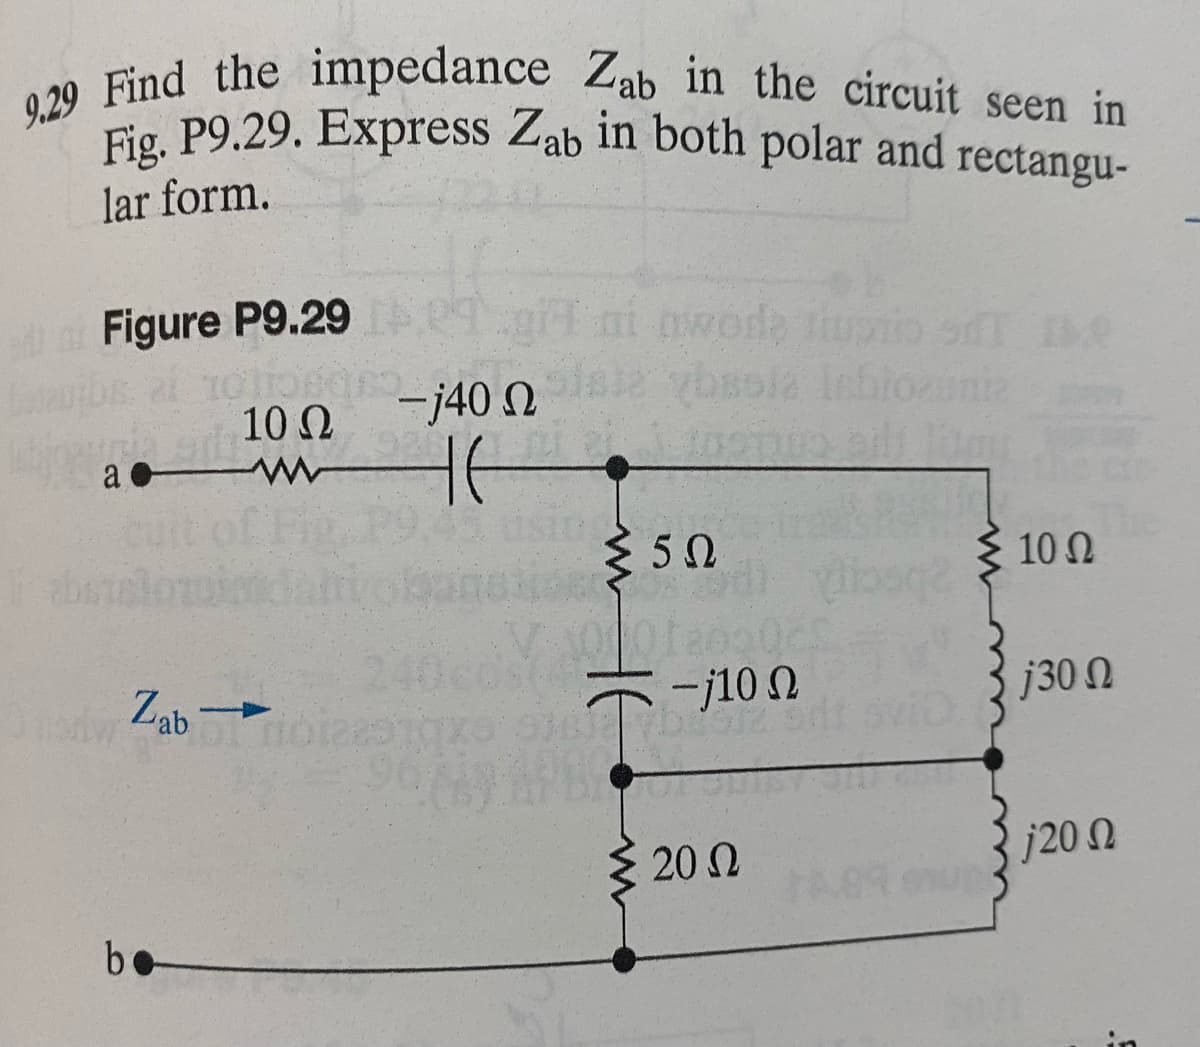 9.29 Find the impedance Zab in the circuit seen in
Fig. P9.29. Express Zab in both polar and rectangu-
lar form.
Figure P9.29
Ω
arb 100
www
a
Onorw
Zab-
be
29
-j40 n
46
ni mwede tiupio si e
≤50
5Ω
-j10 Ω
DECIZ
20 Ω
lites
A89 9
10 Ω
| j30 Ω
j20 Ω